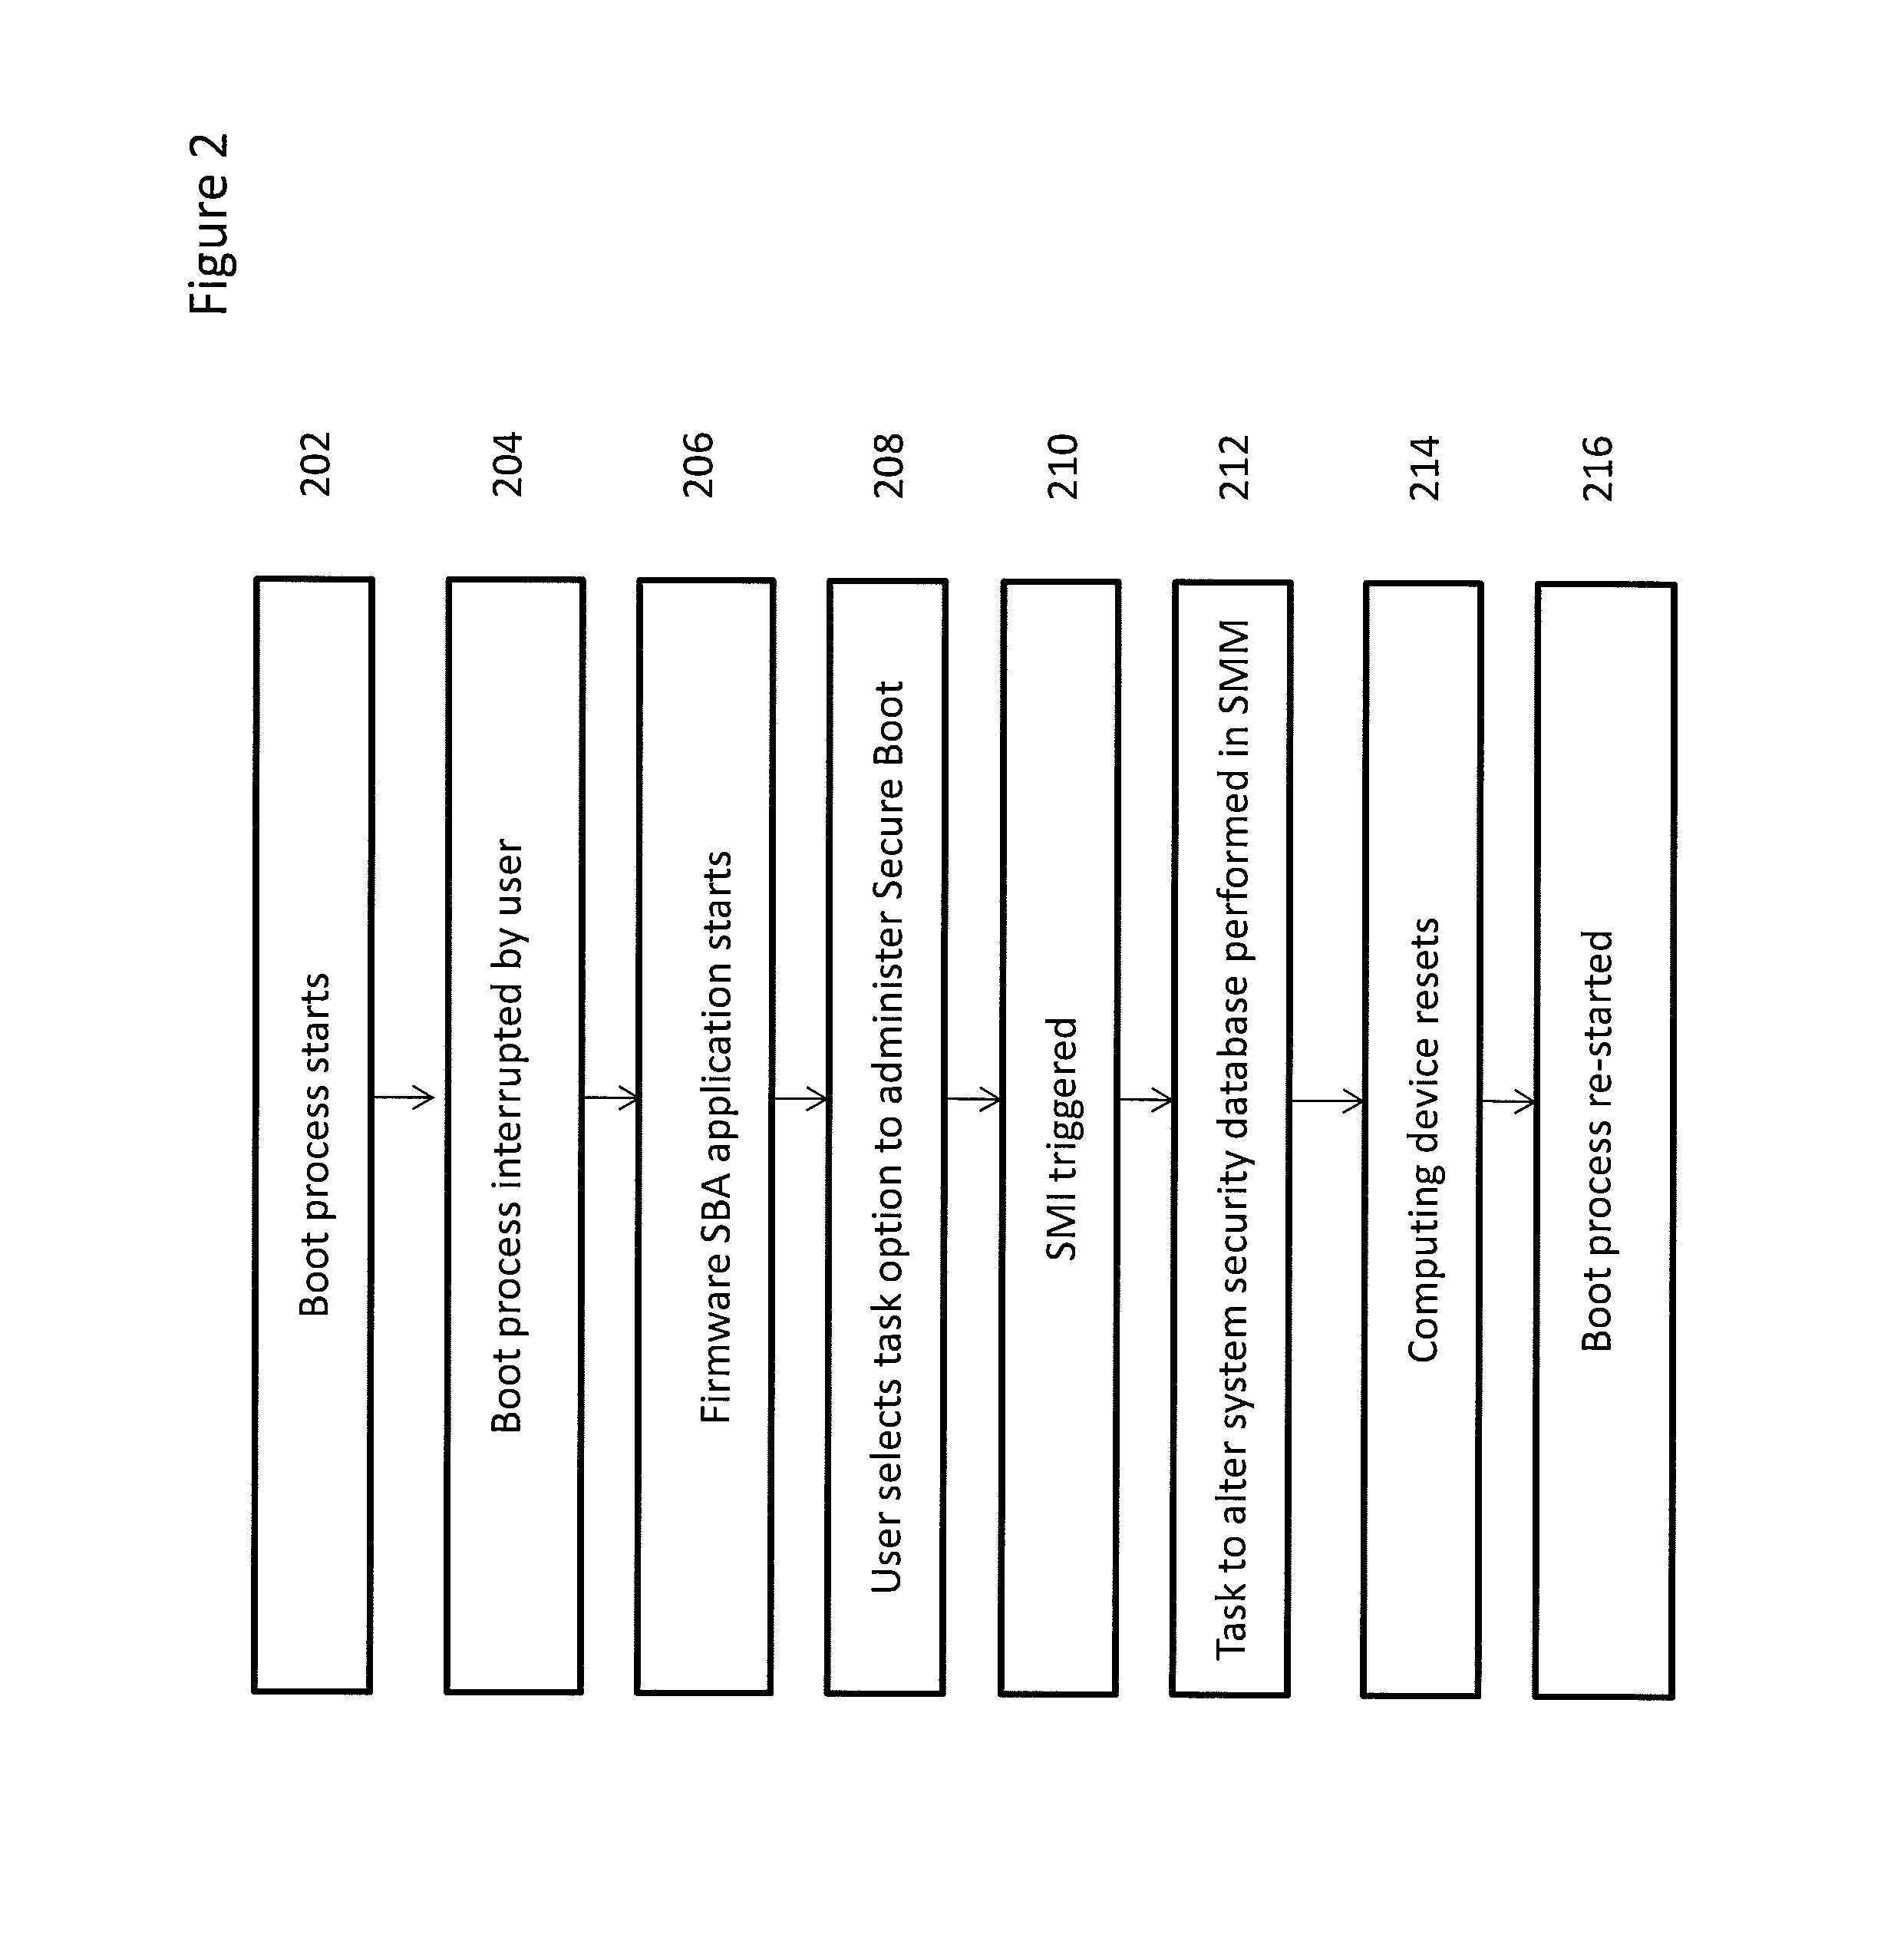 Secure boot administration in a Unified Extensible Firmware Interface (UEFI)-compliant computing device